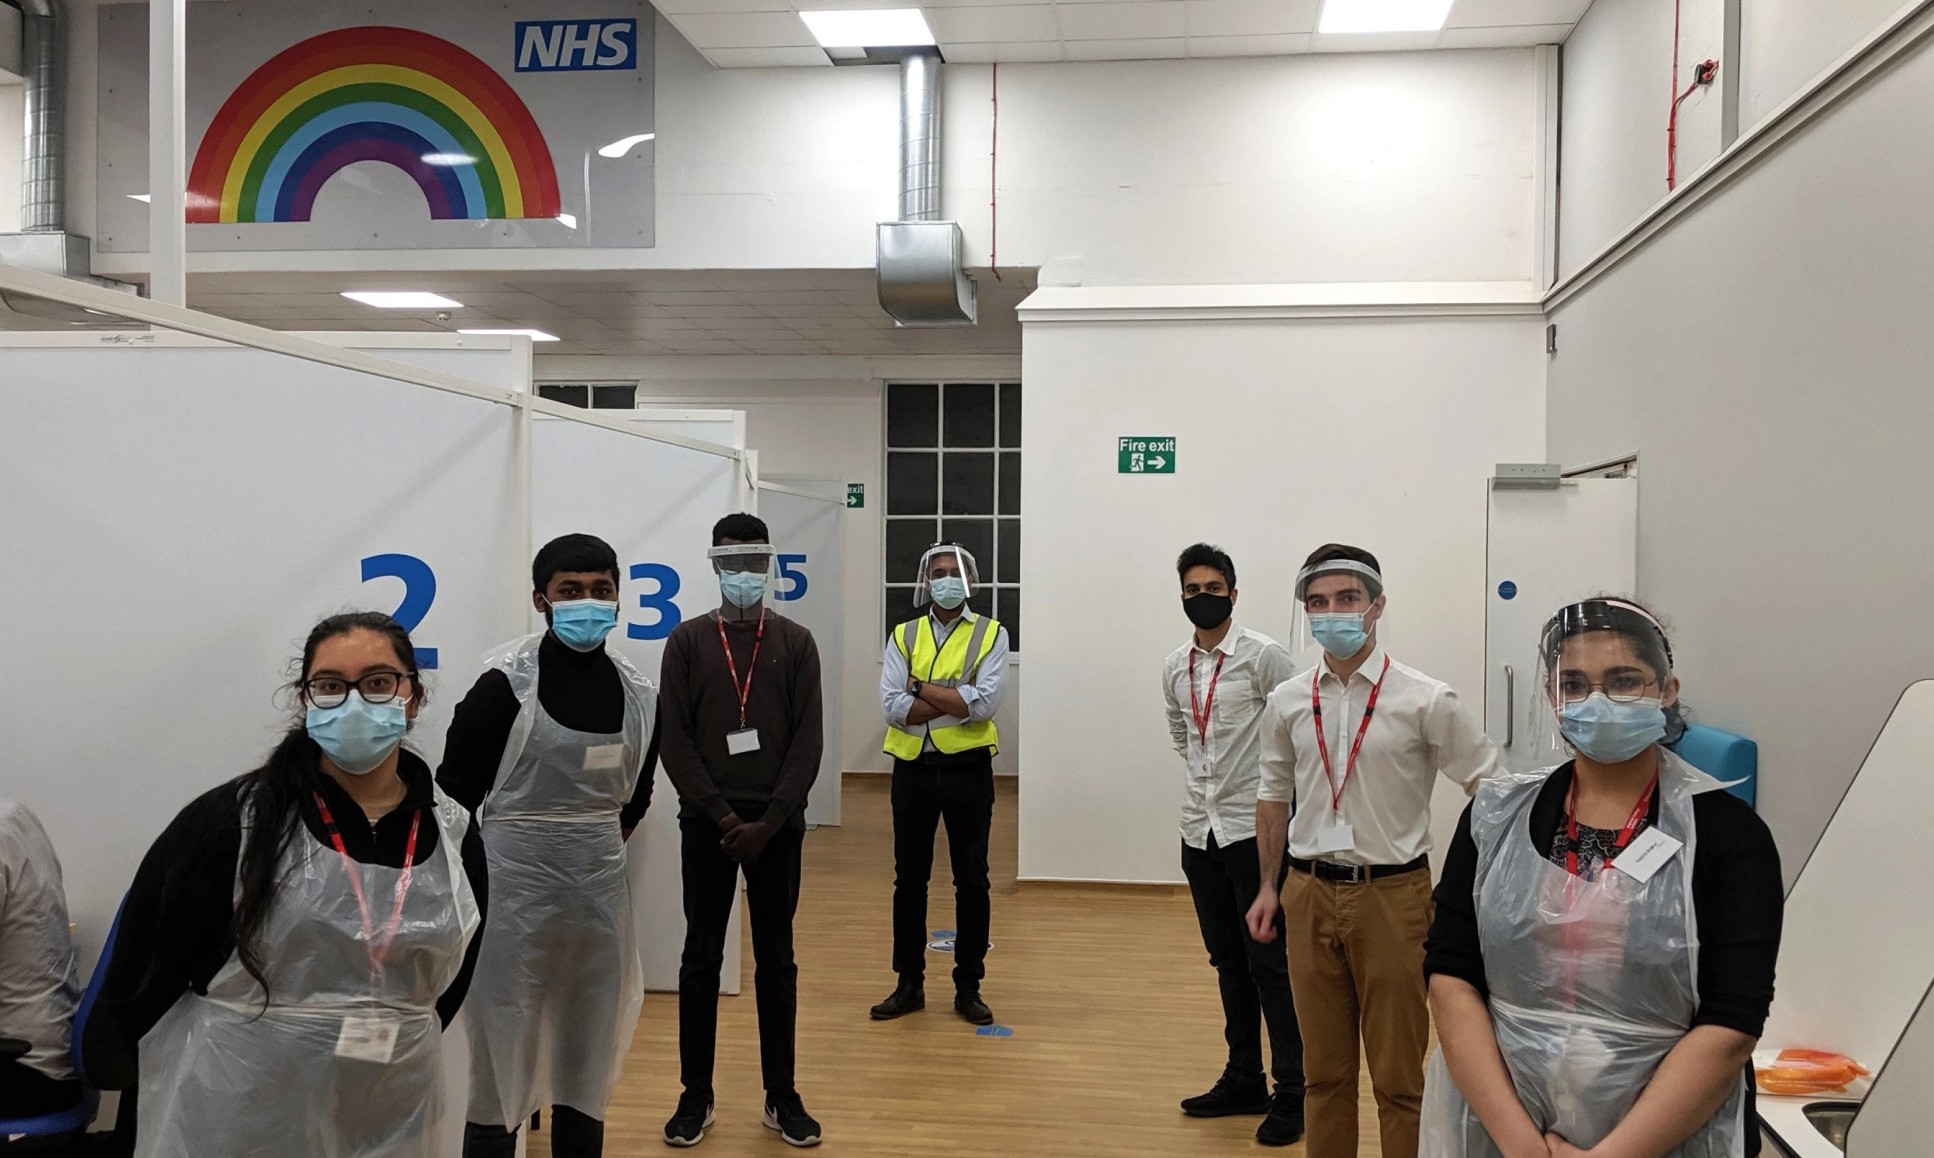 Imperial students at an NHS vaccination centre